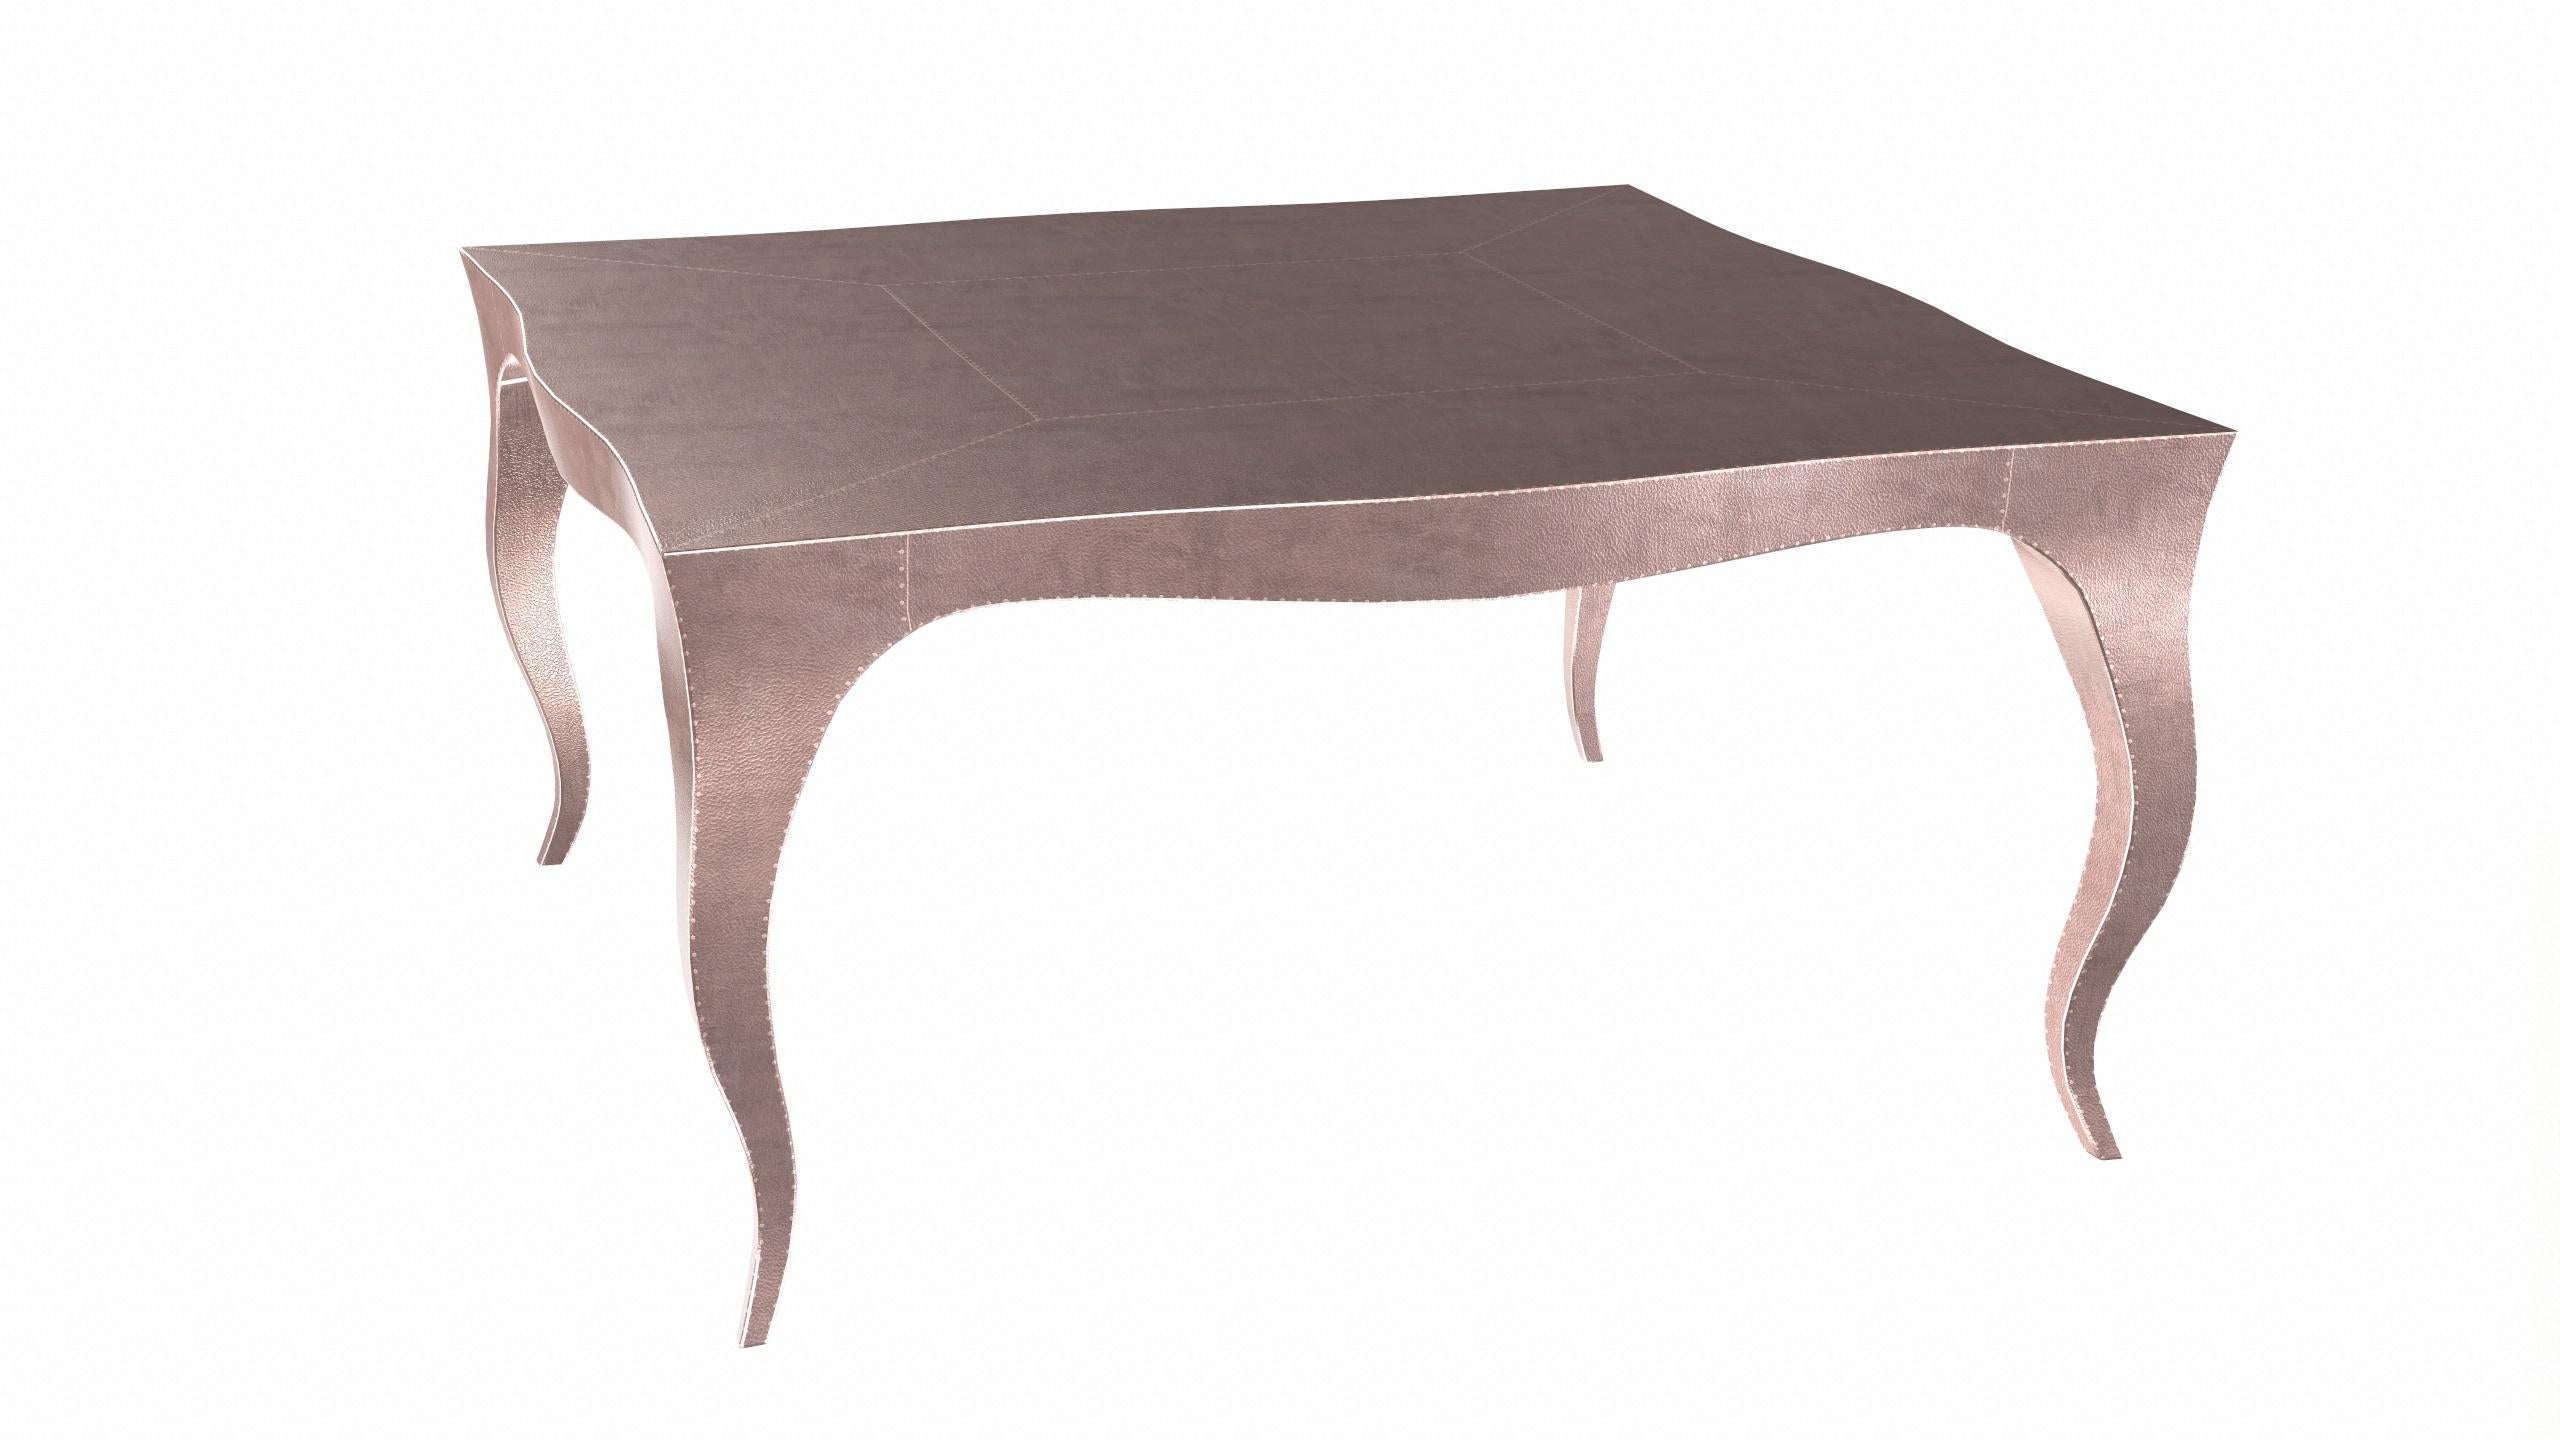 Metal Louise Art Deco Nesting Tables Fine Hammered Copper by Paul 18.5x18.5x10 inch  For Sale